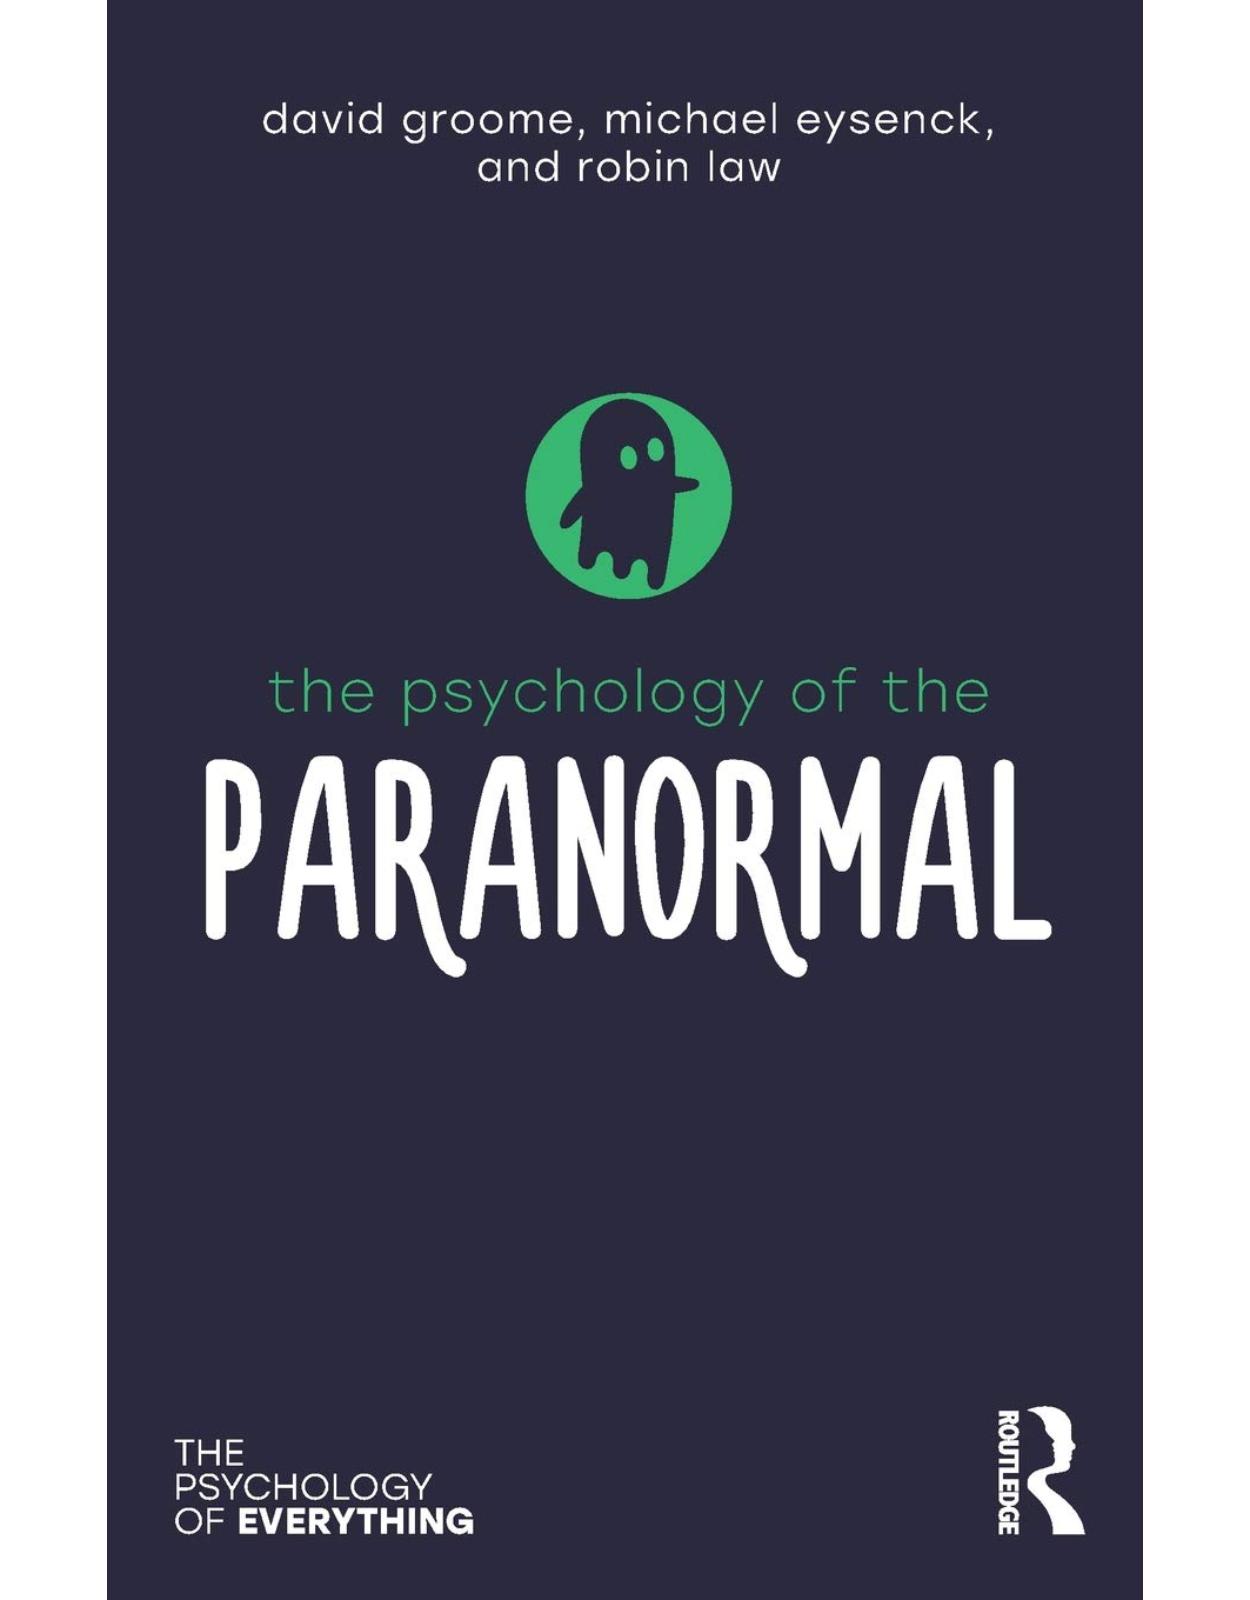 The Psychology of the Paranormal (The Psychology of Everything)